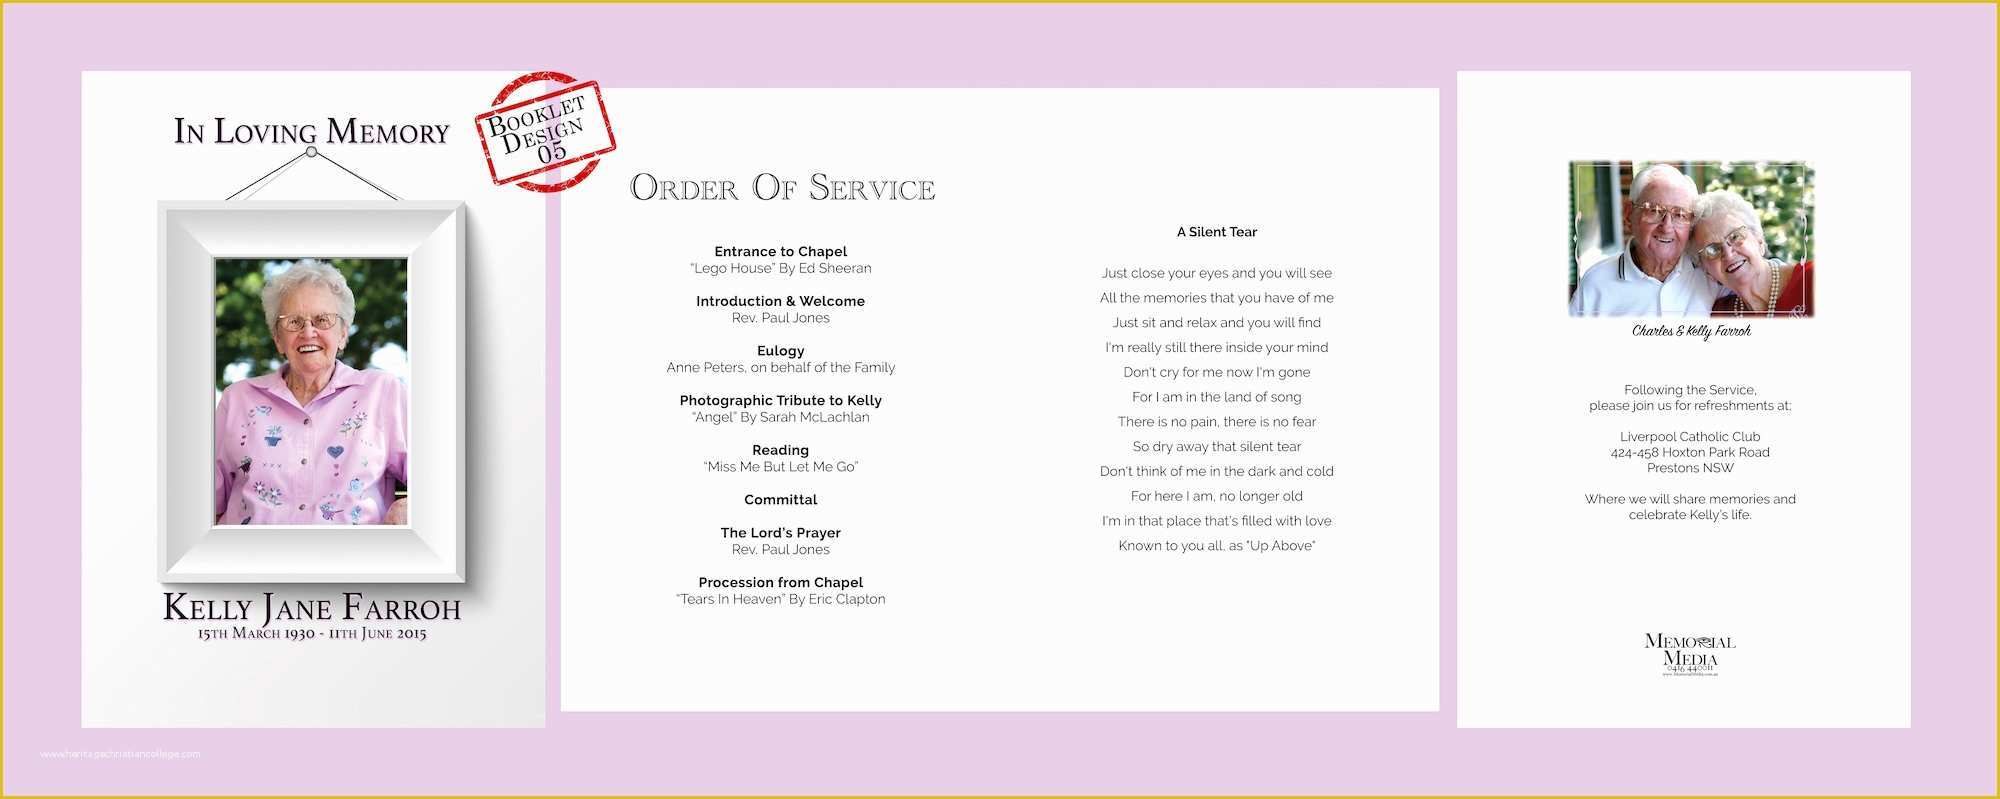 Funeral order Of Service Template Free Of Funeral order Service Template Free Download Uk Gallery